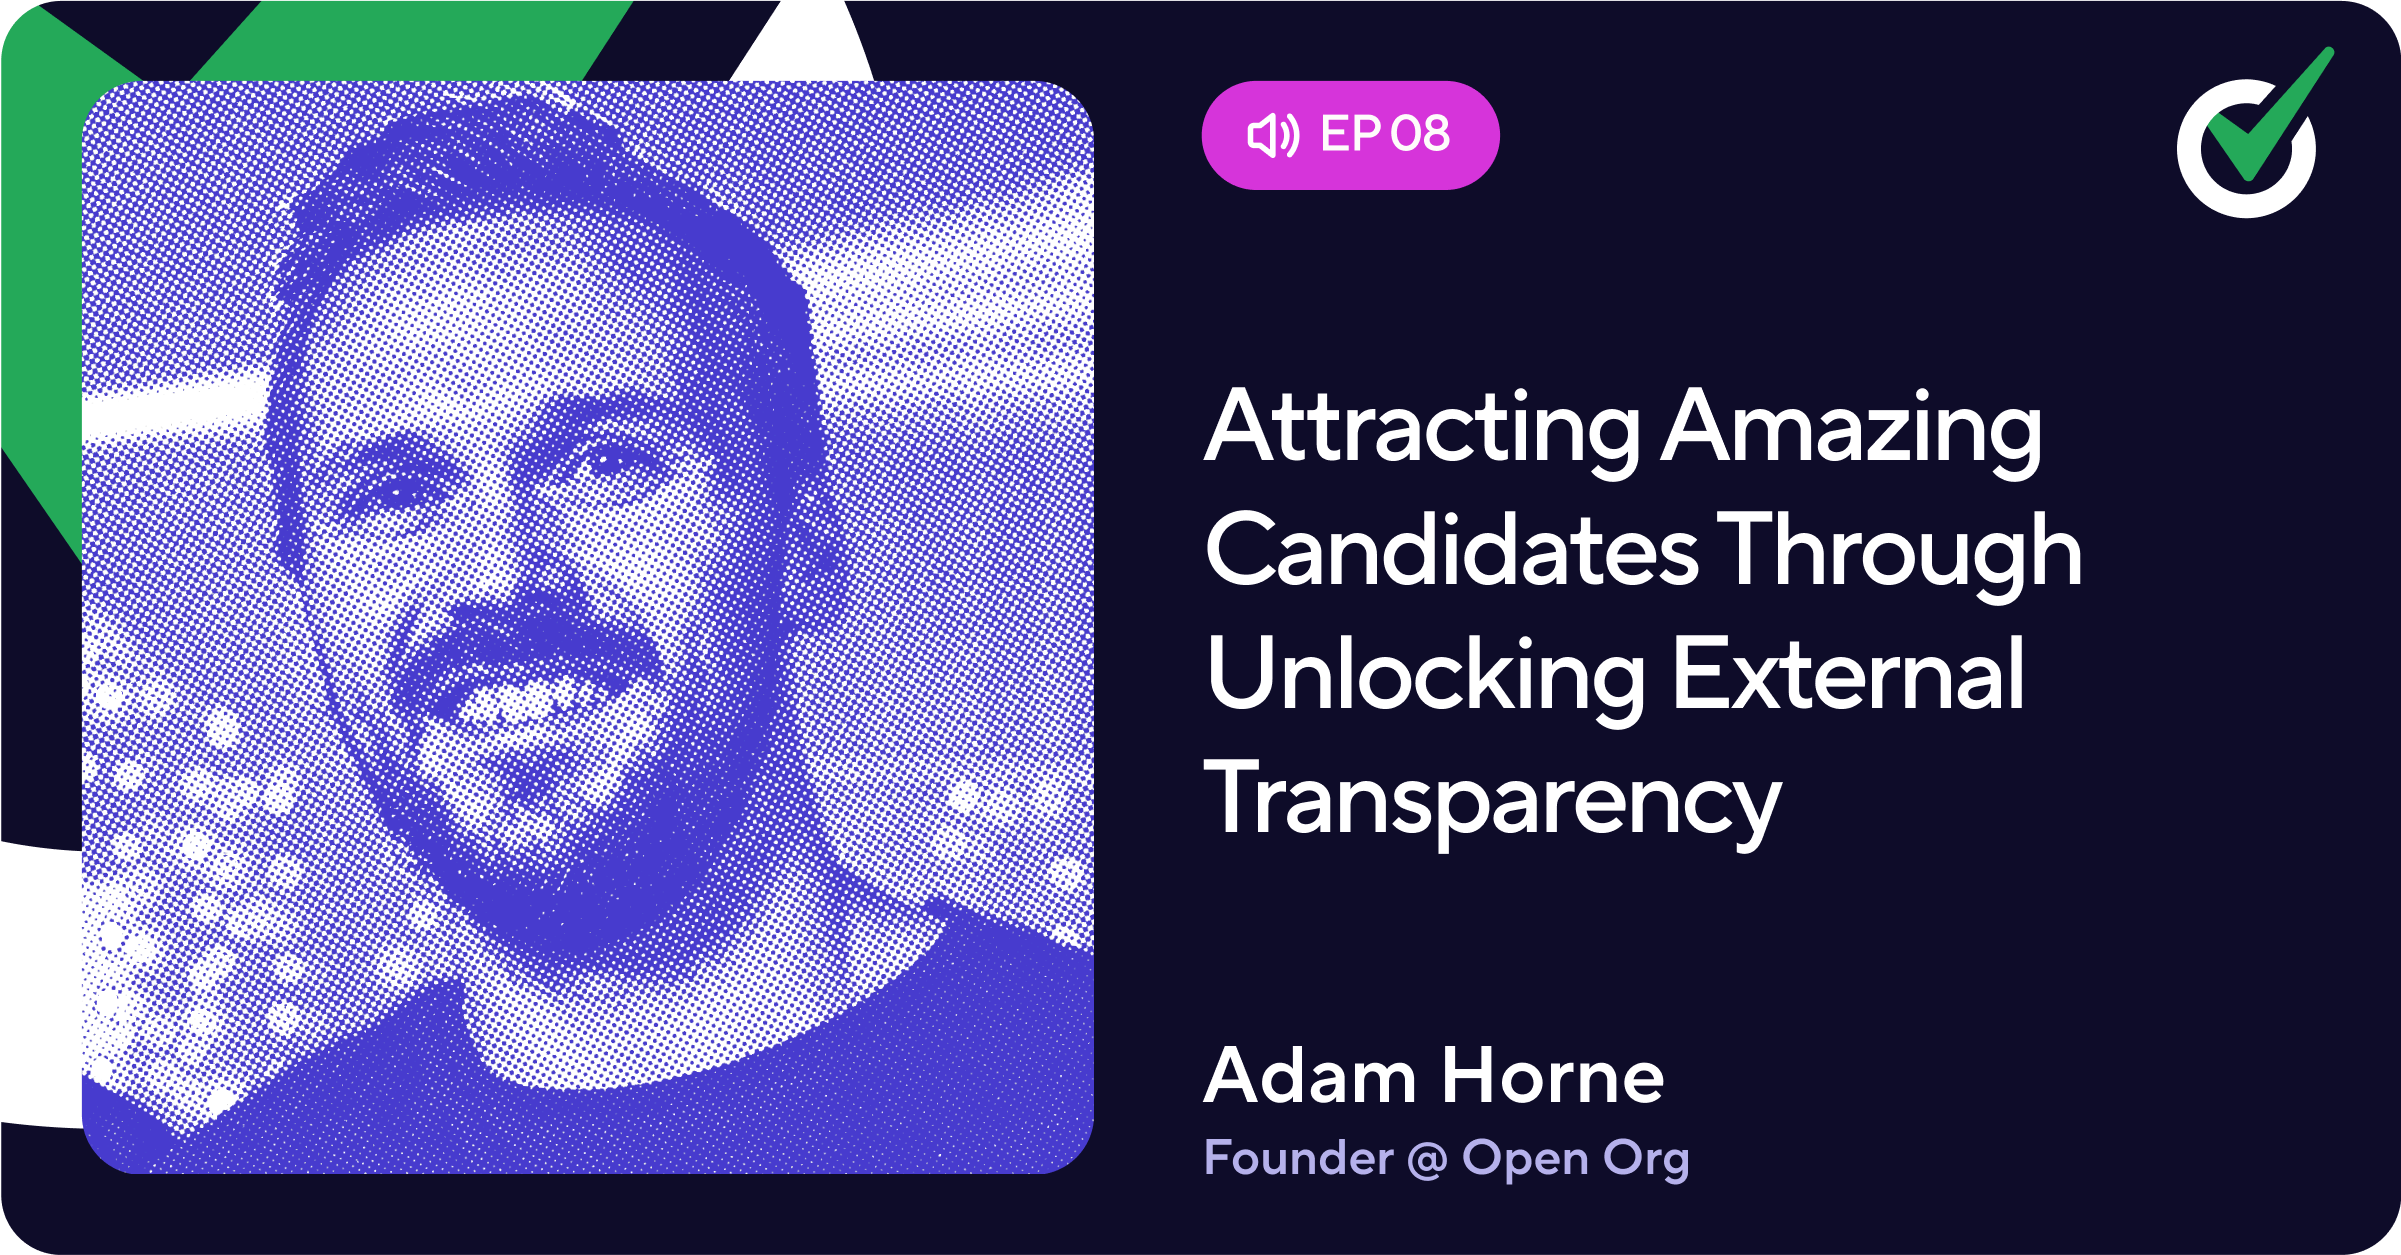 Episode 8 - Attracting Amazing Candidates Through Unlocking External Transparency